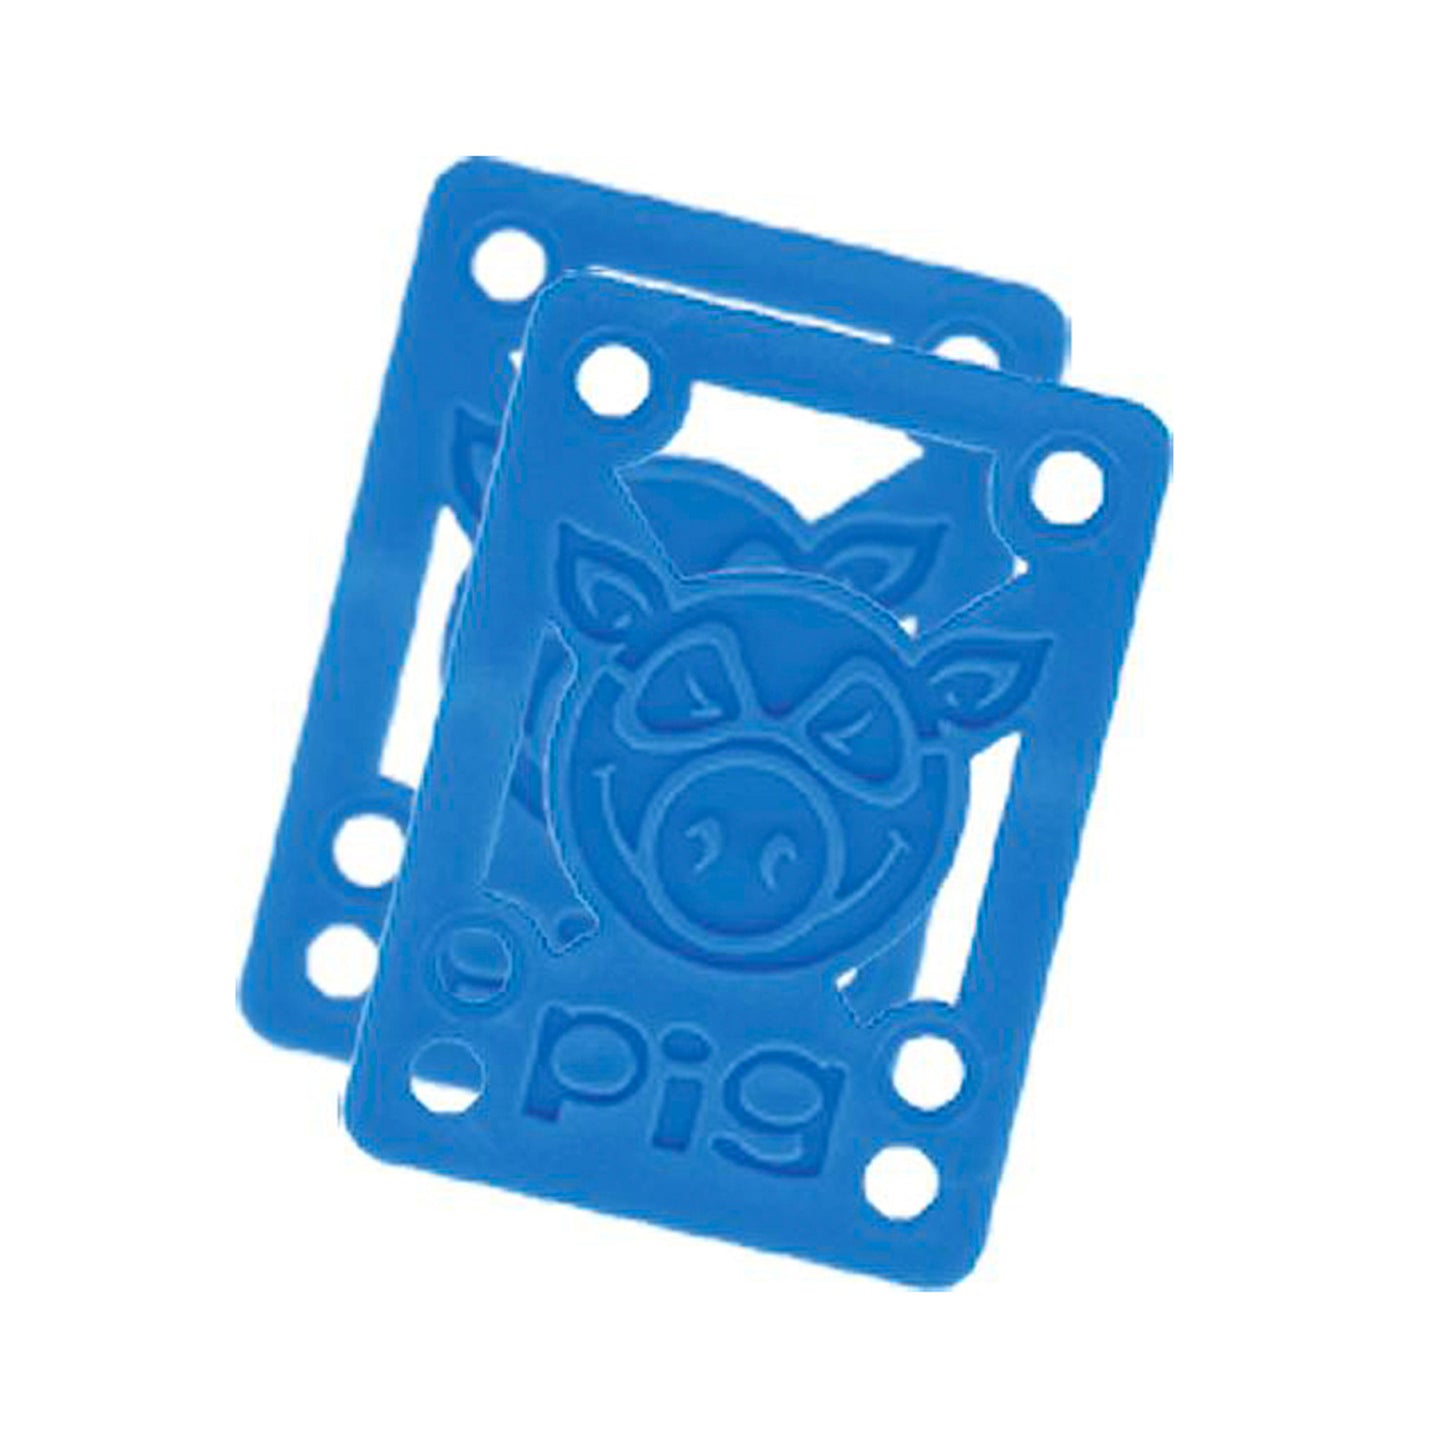 Pig Piles Risers 1/8" (Pack of 2) - Blue - Prime Delux Store